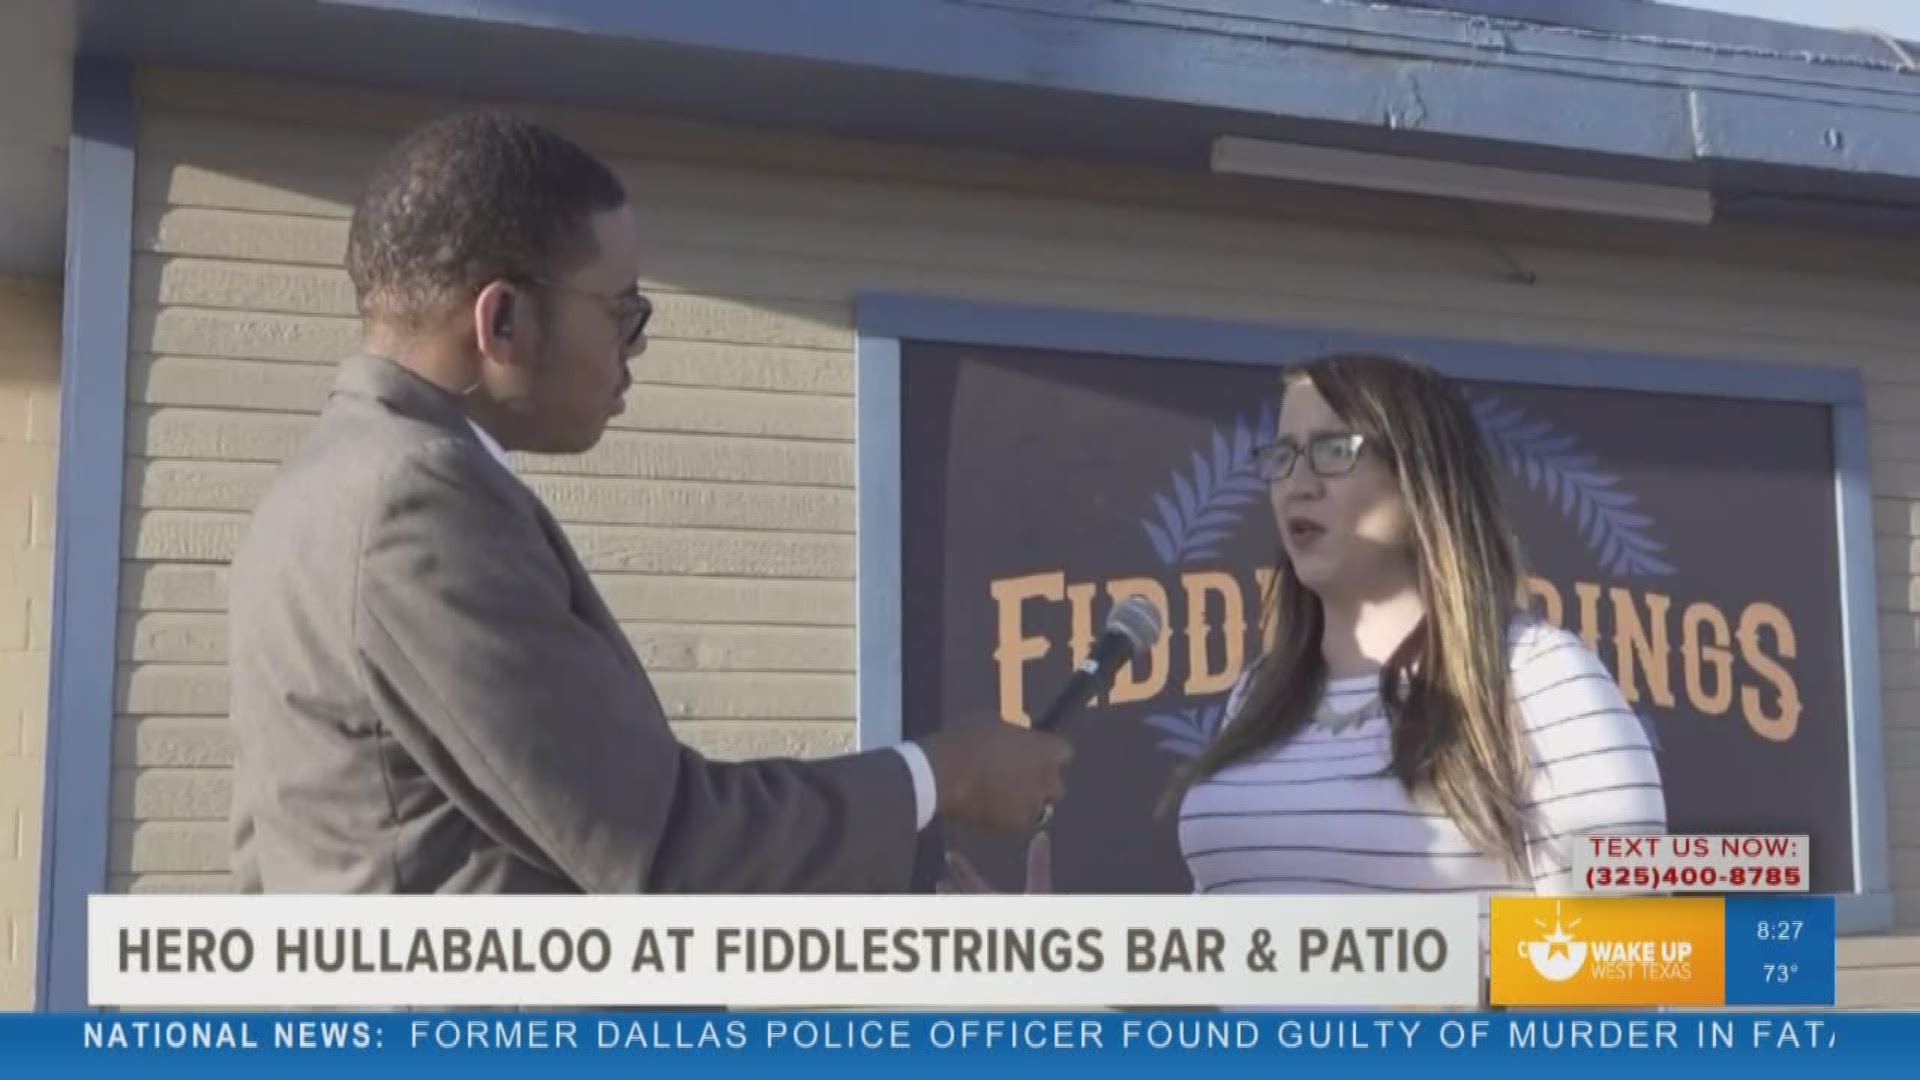 Our Malik Mingo spoke with an All Veteran's Council  commander about the 'HERO Hullabaloo" on October 6 at Fiddlestring's Bar & Patio.